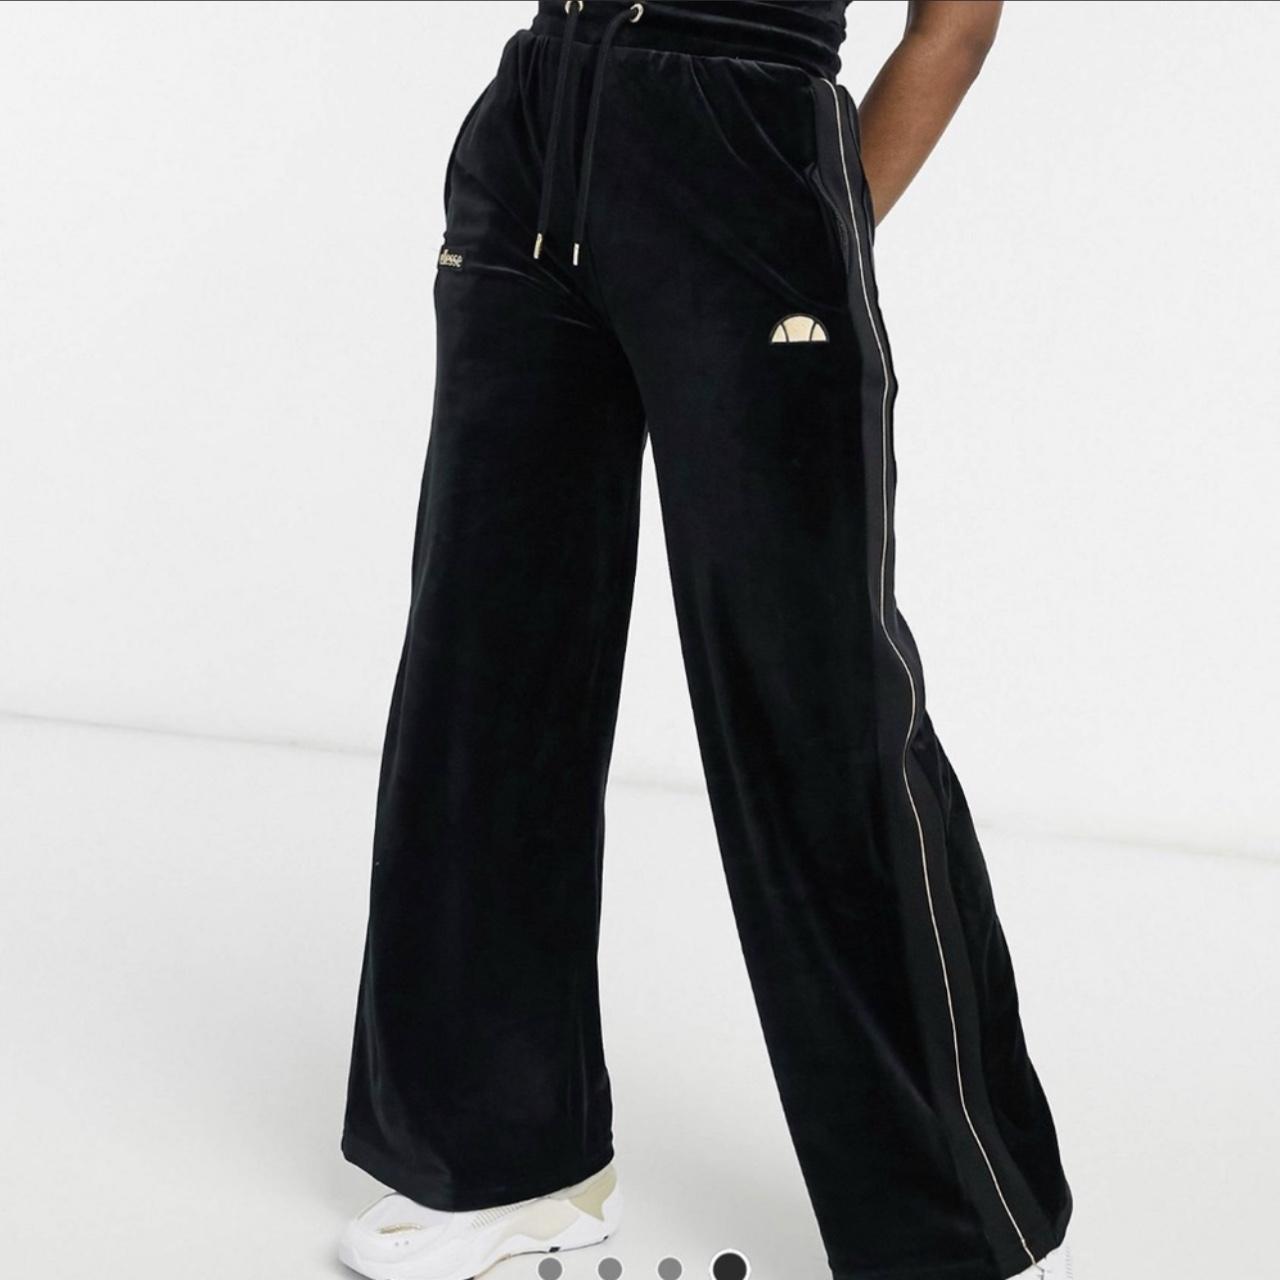 Ellesse Women's Black and Gold Trousers